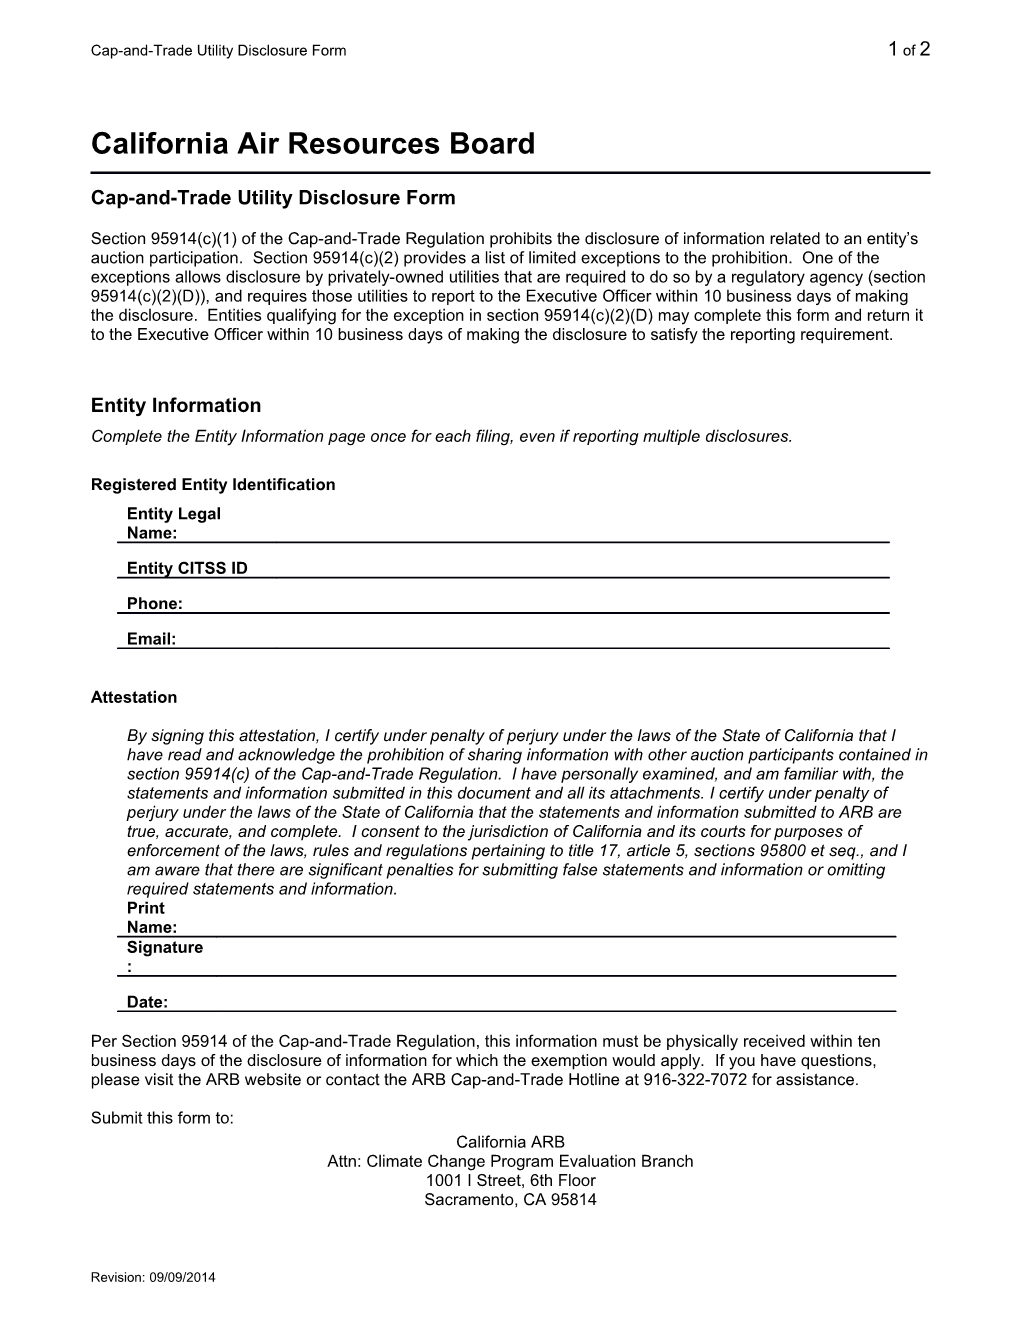 Cap-And-Trade Utility Disclosure Form1 of 2